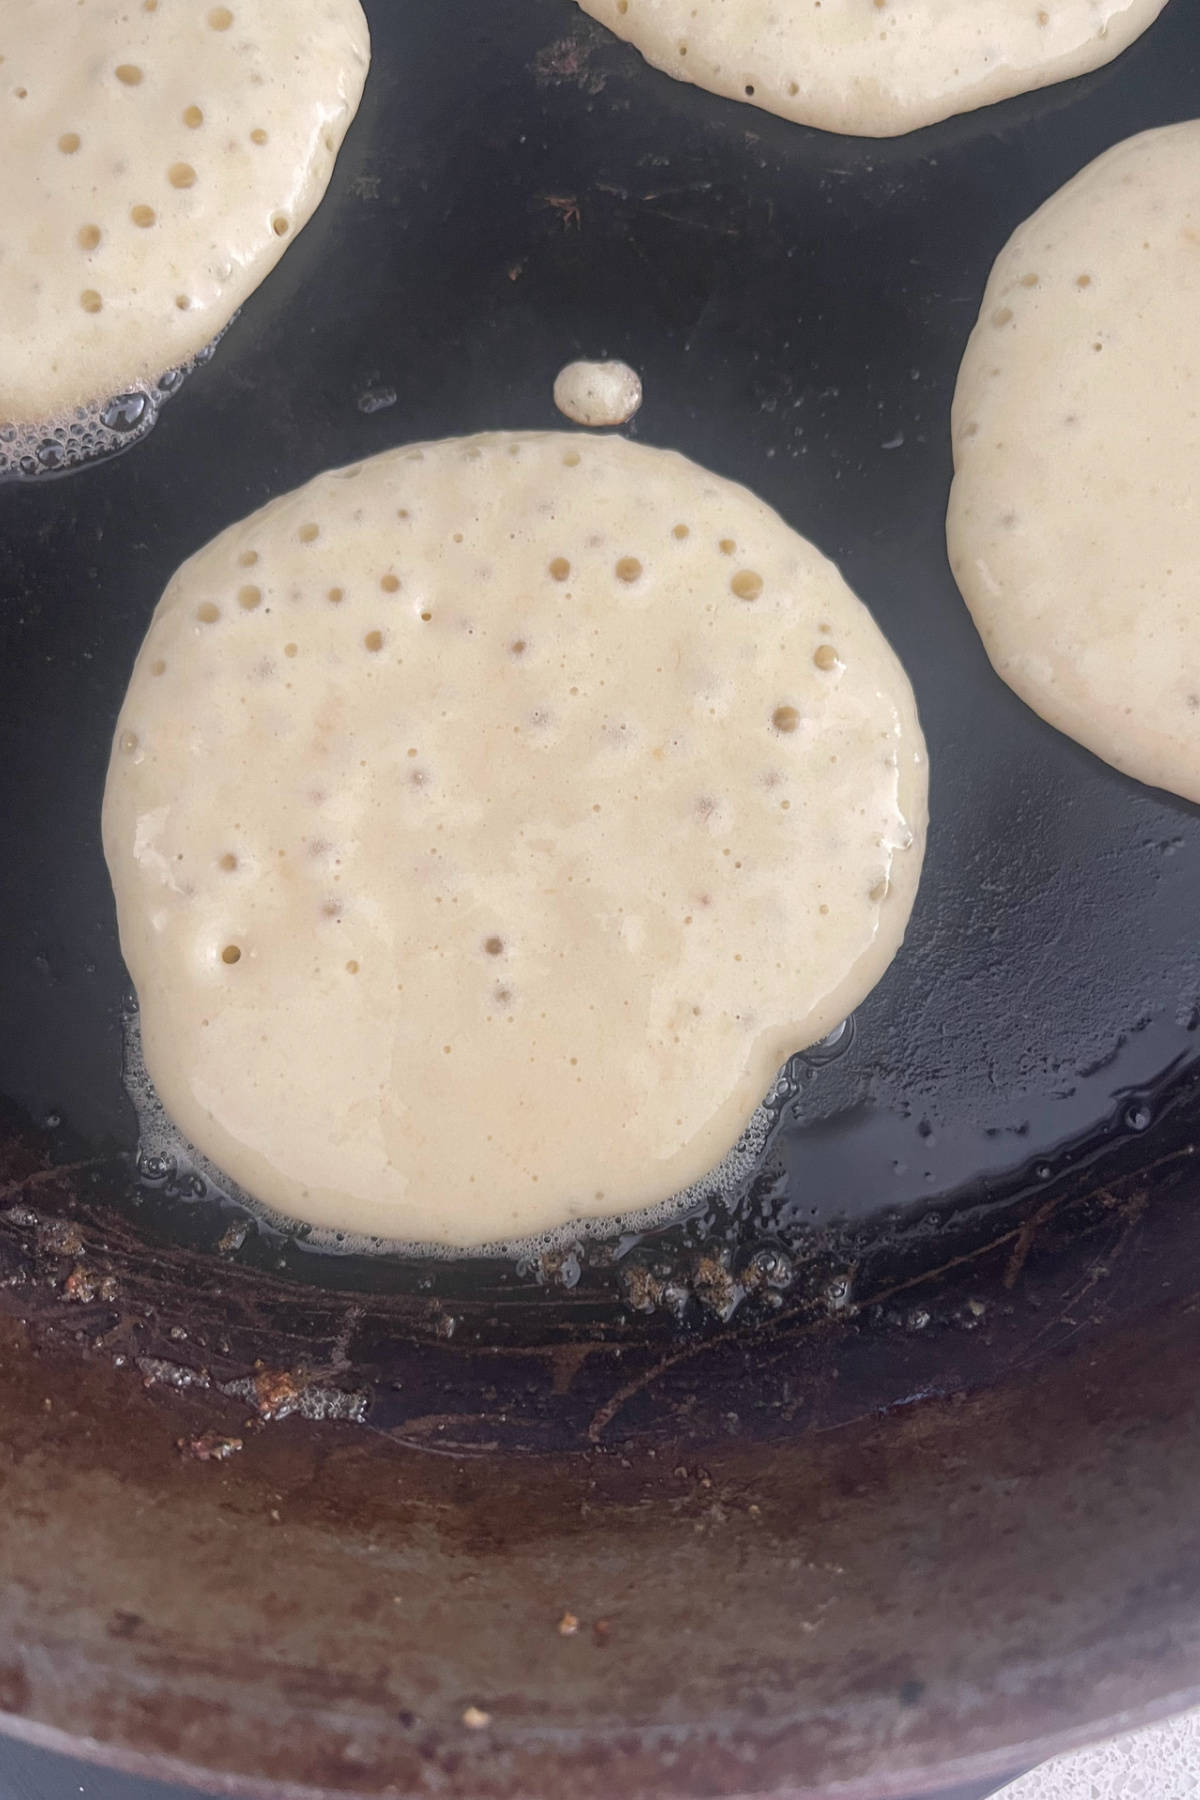 Banana pikelet in a frying pan with bubbles on one side.